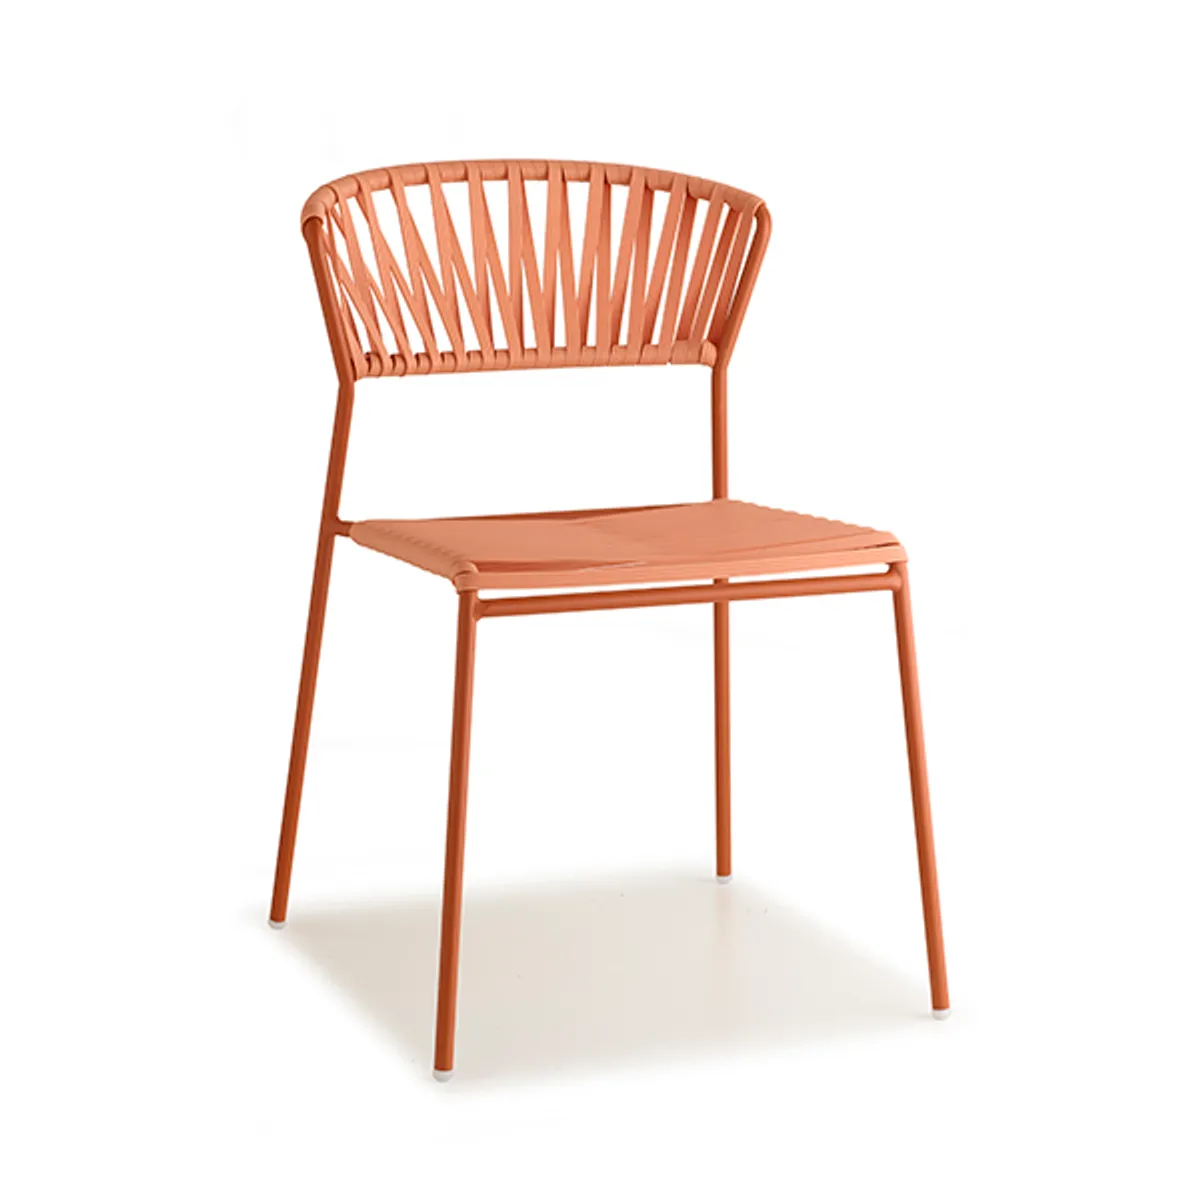 Robyn Pvc Exterior Chair For Commercial Use Inside Out Contracts 022